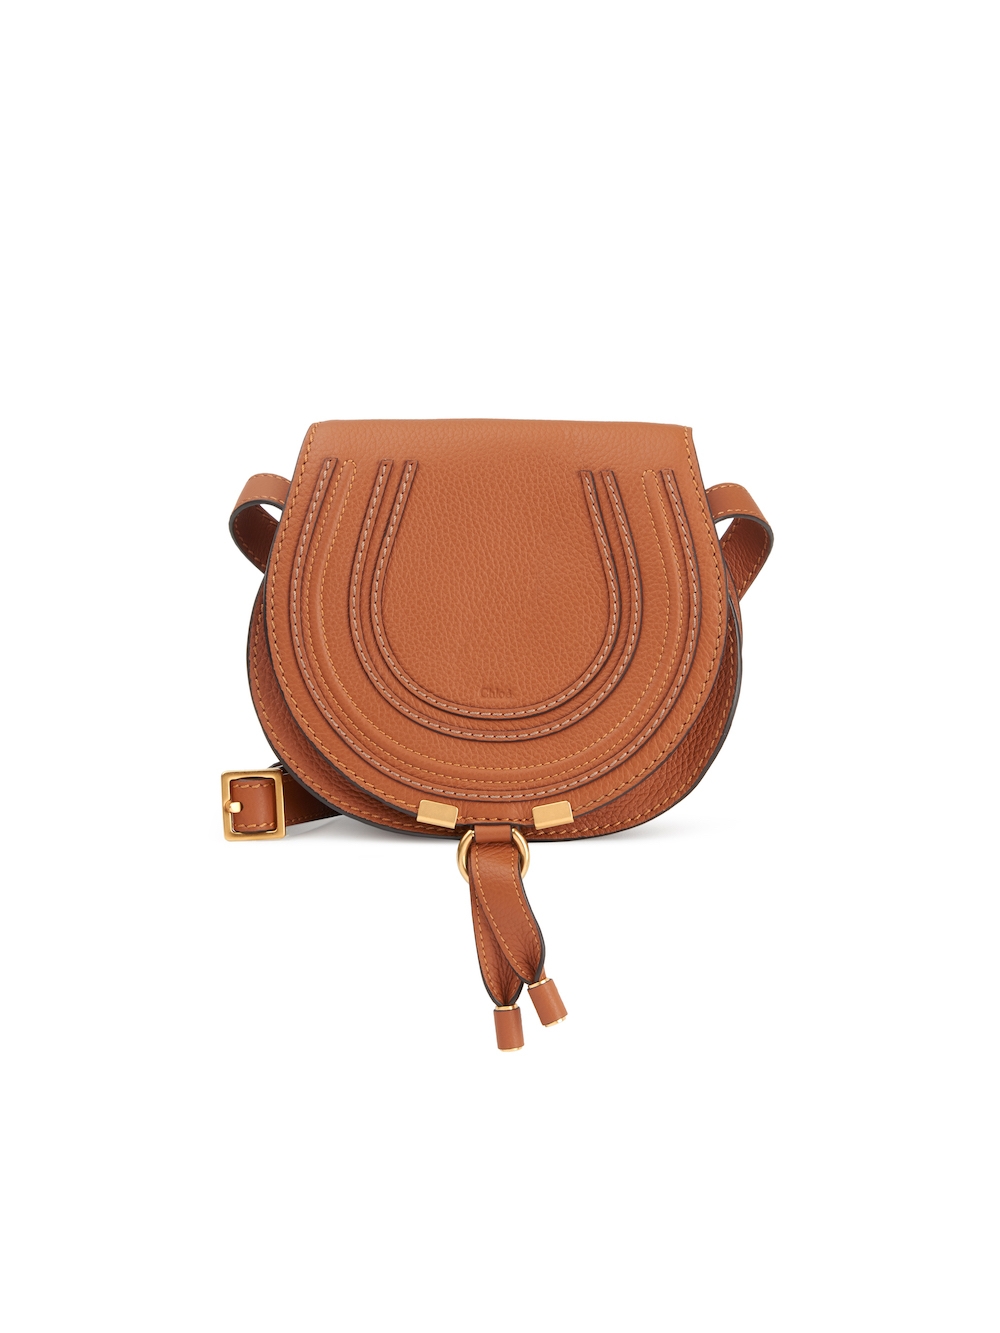 Classic Chloé Handbags to Invest In in 2021—From the Paddington to the Marcie  Bag